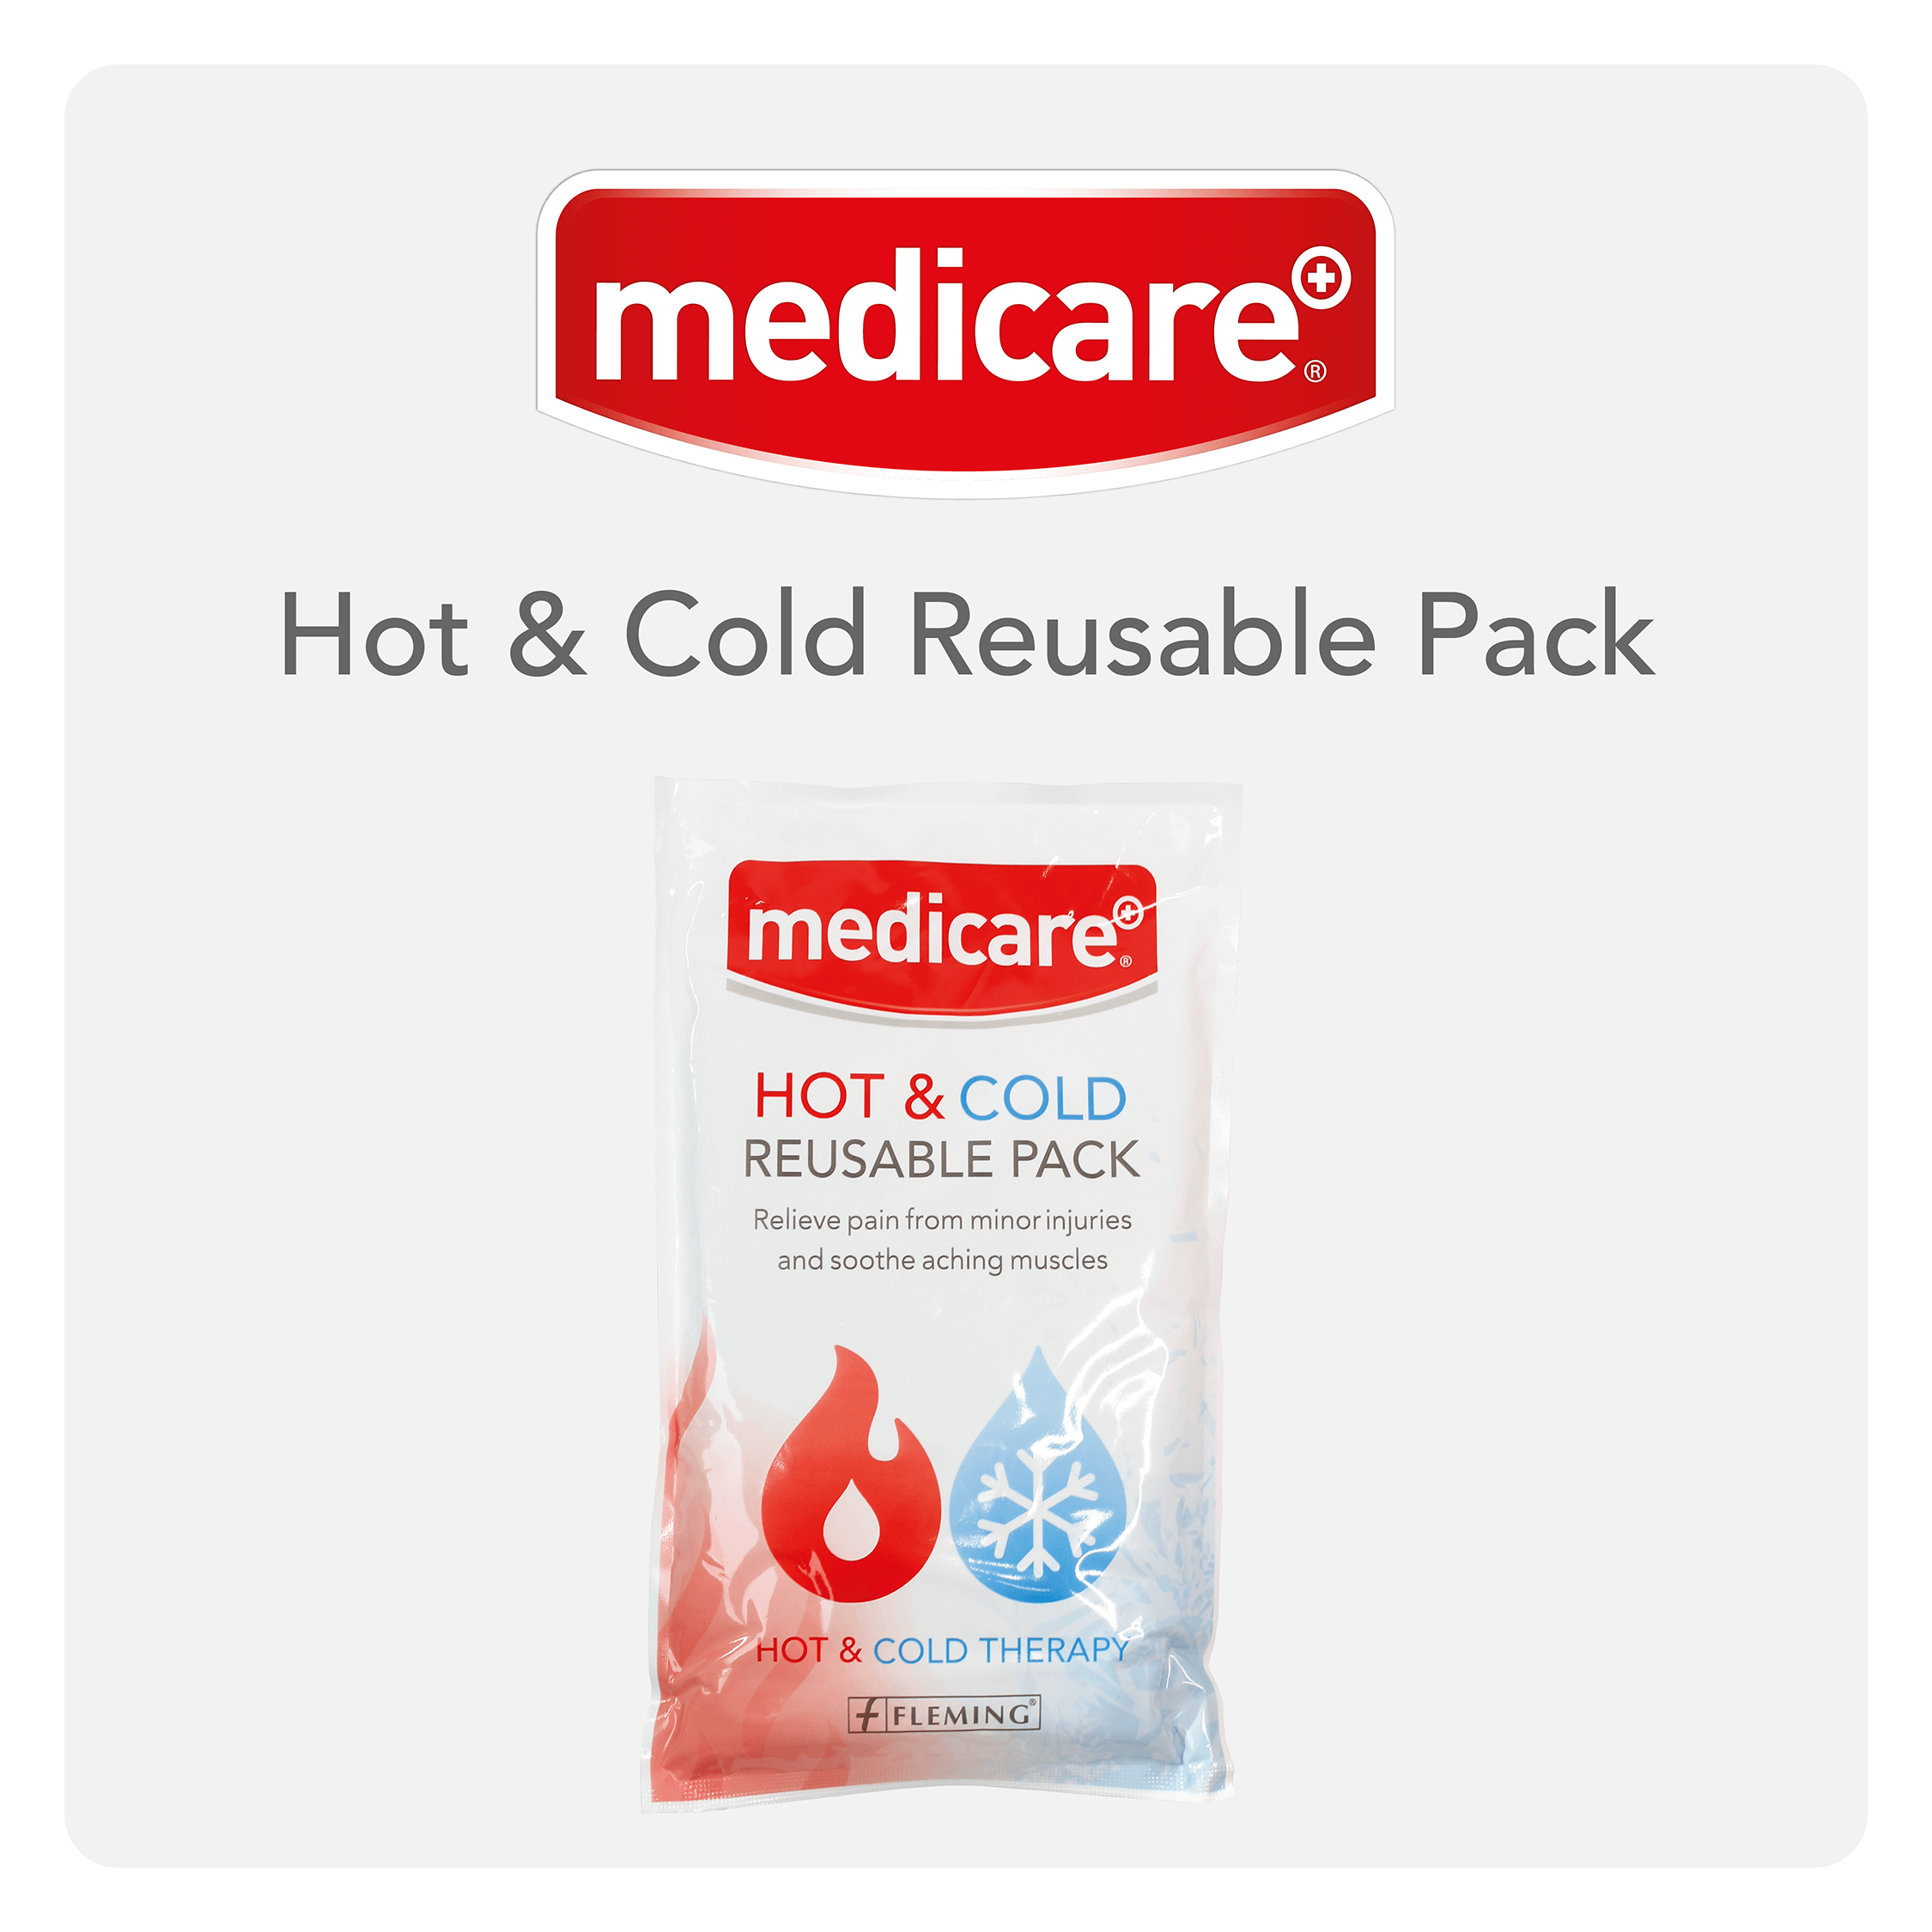 Hot & Cold Reusable Pack